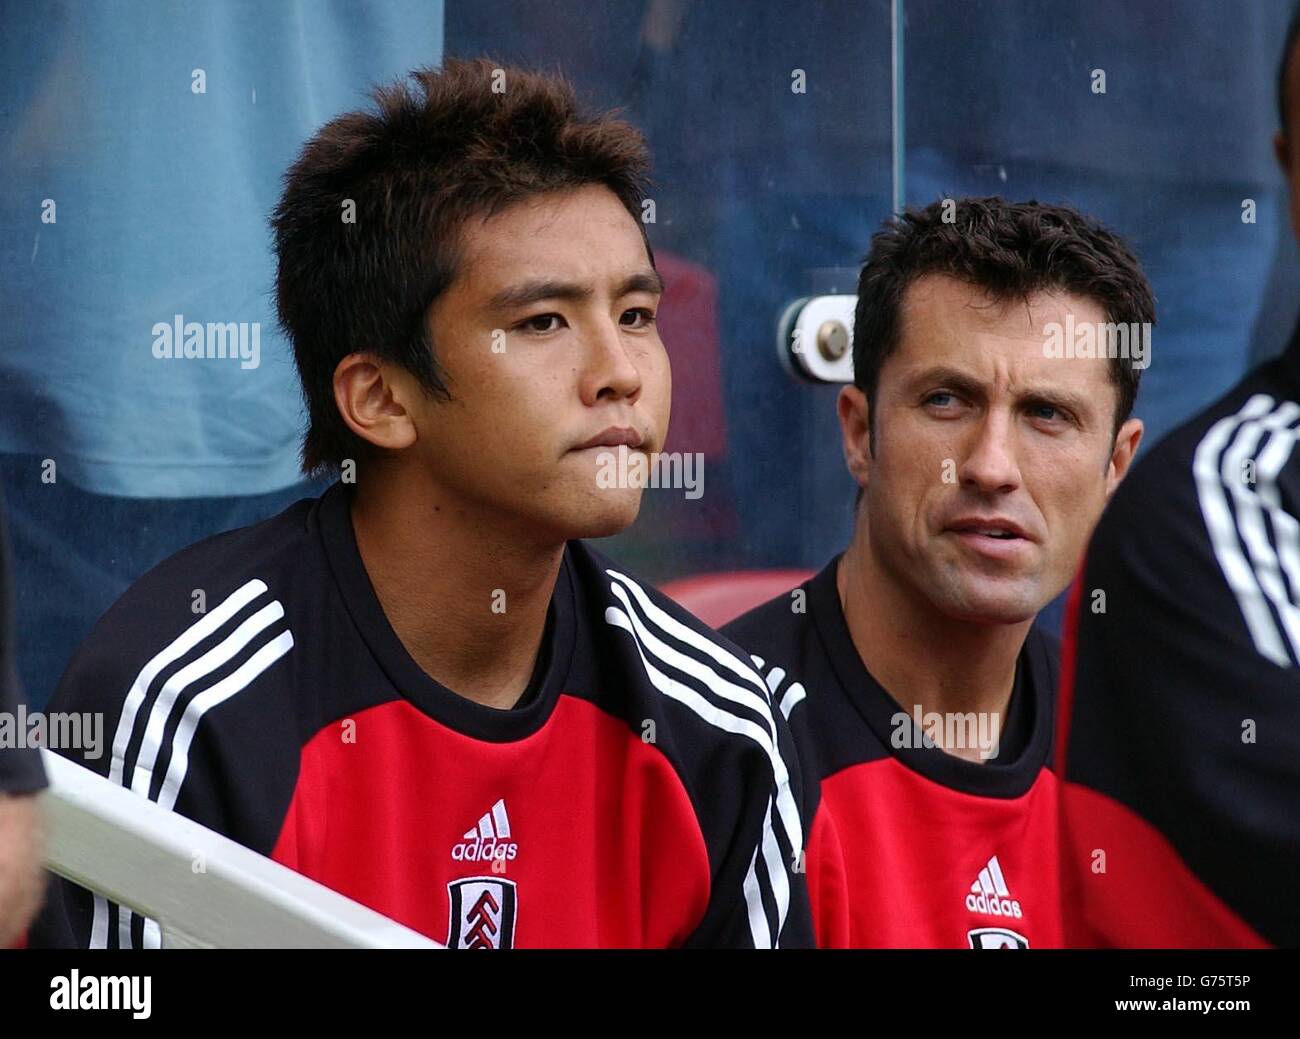 Fulham's Japanese star Junichi Inamoto sits the bench before coming on against Middlesbrough during their FA Barclaycard Premiership match at Middlesbrough's Riverside Stadium. Final score: Middlesbrough 2 Fulham 2. Stock Photo